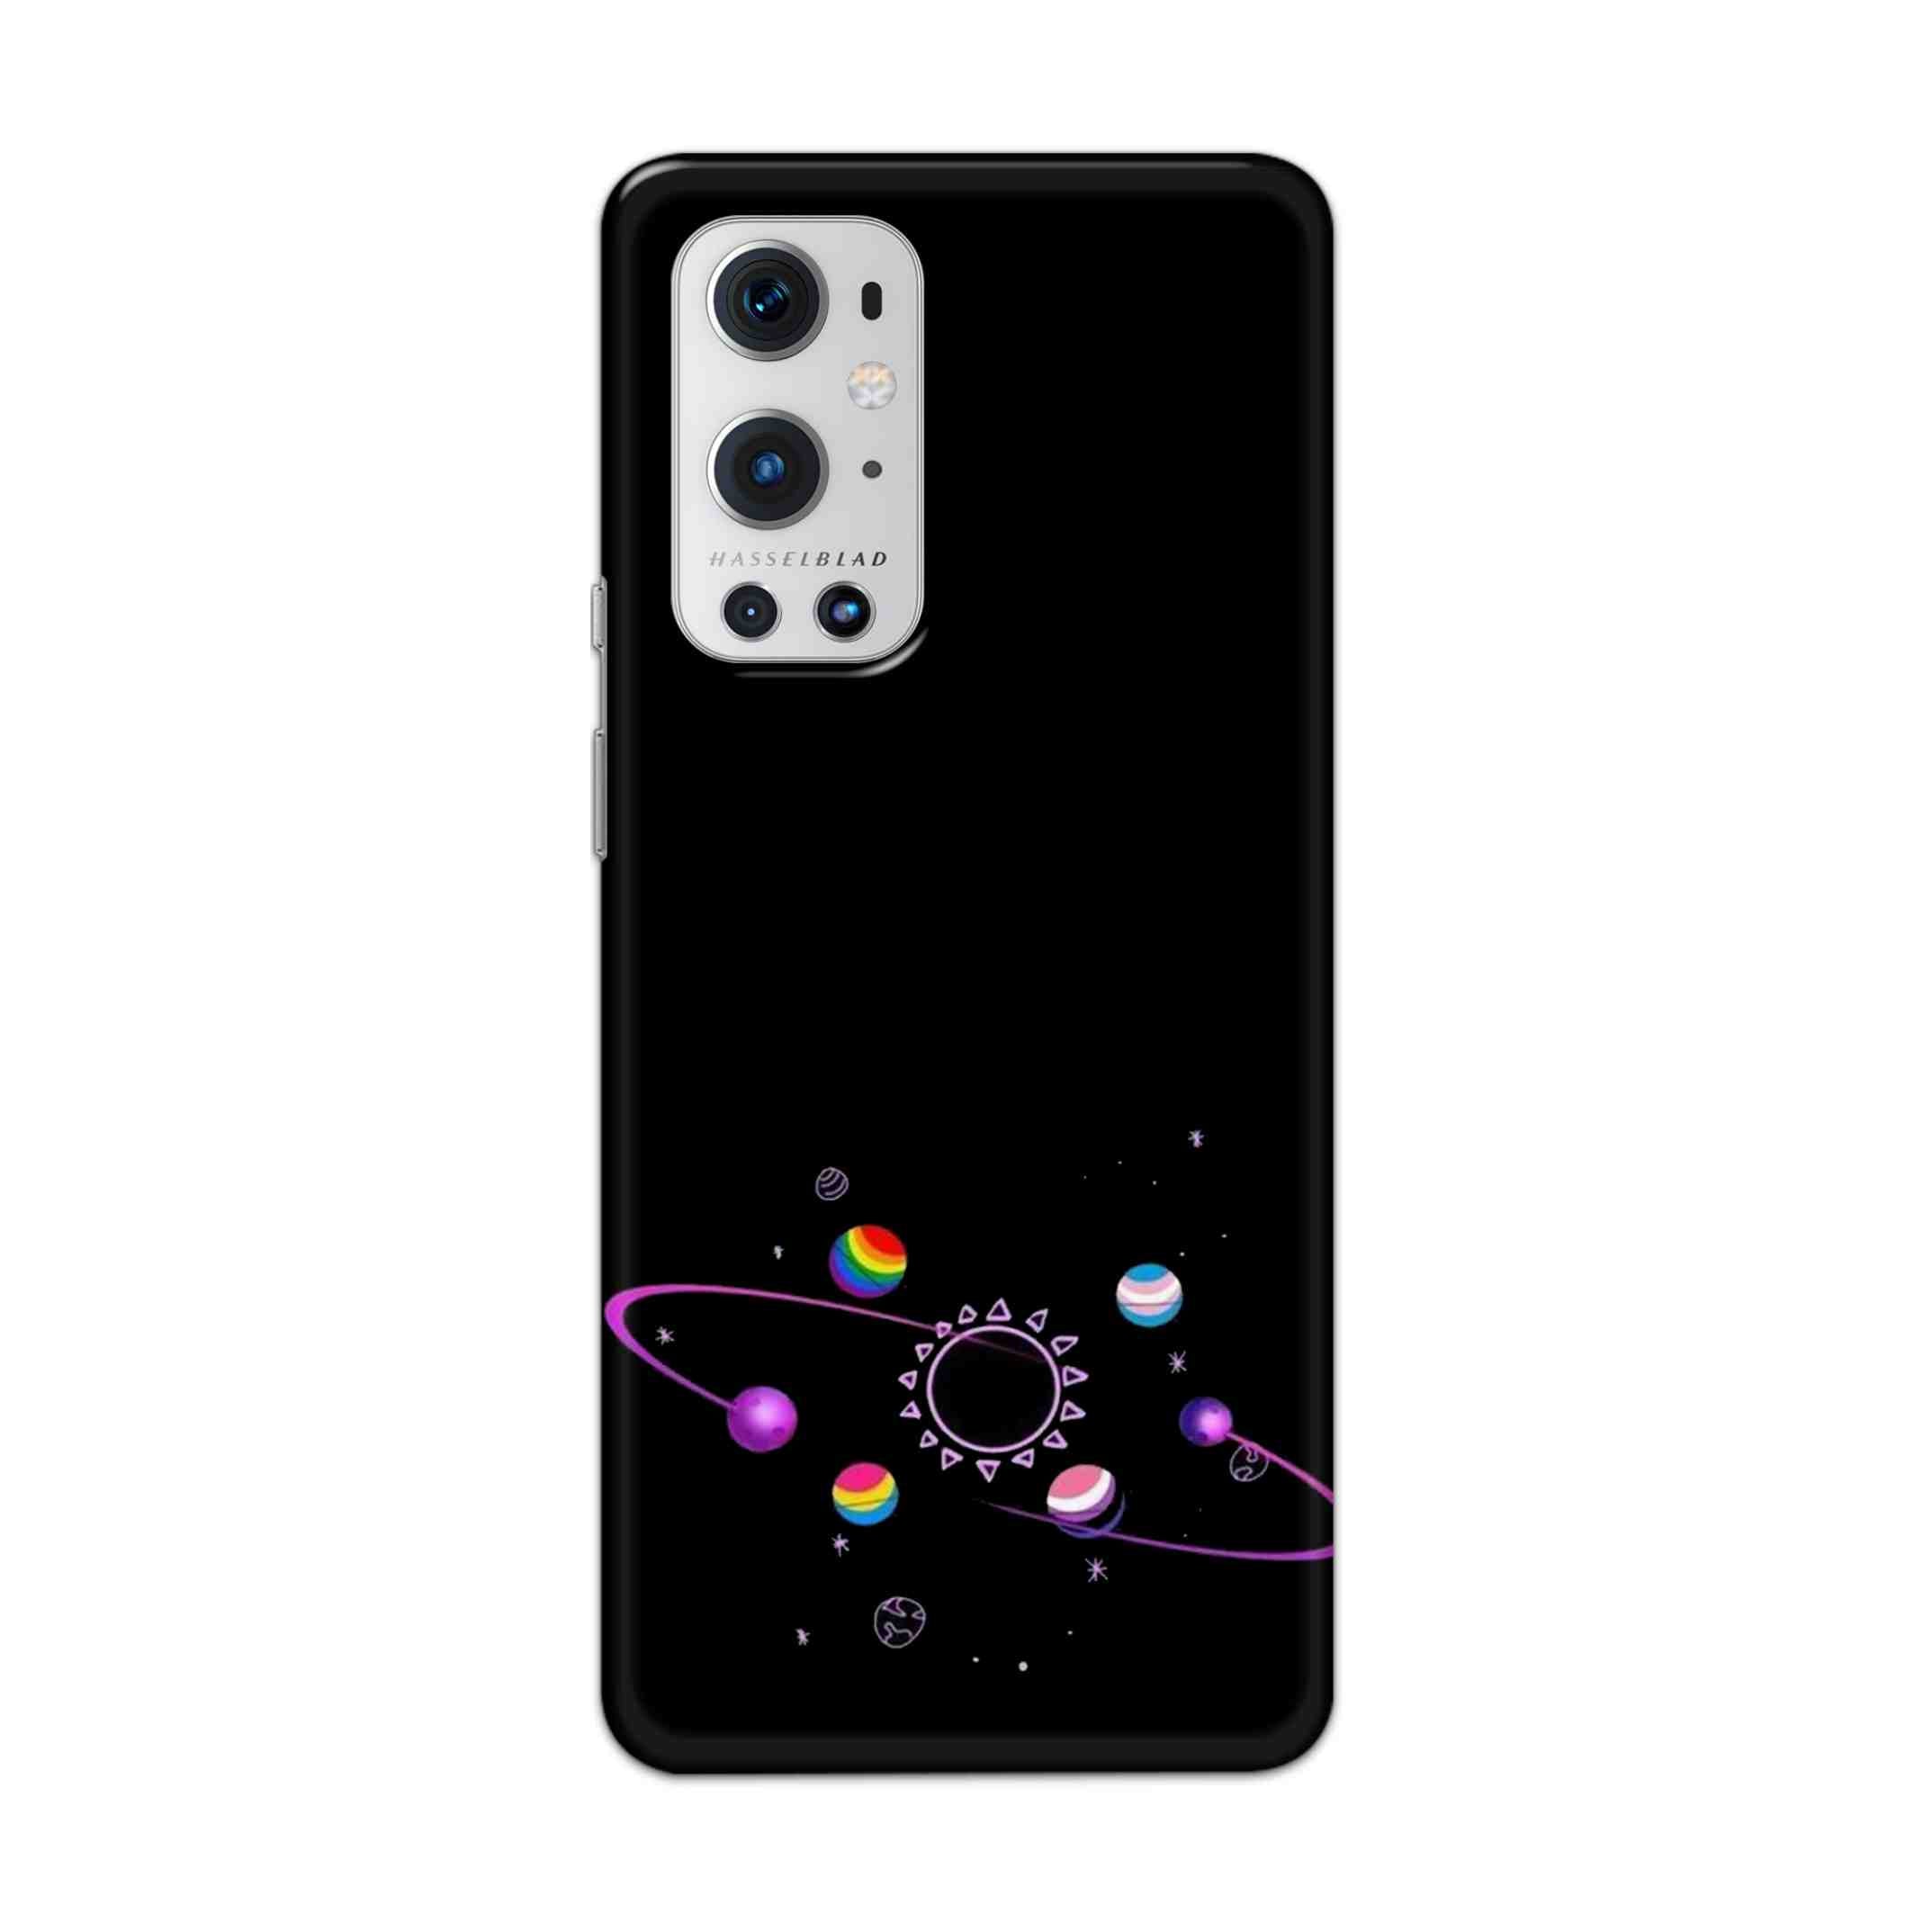 Buy Galaxy Hard Back Mobile Phone Case Cover For OnePlus 9 Pro Online